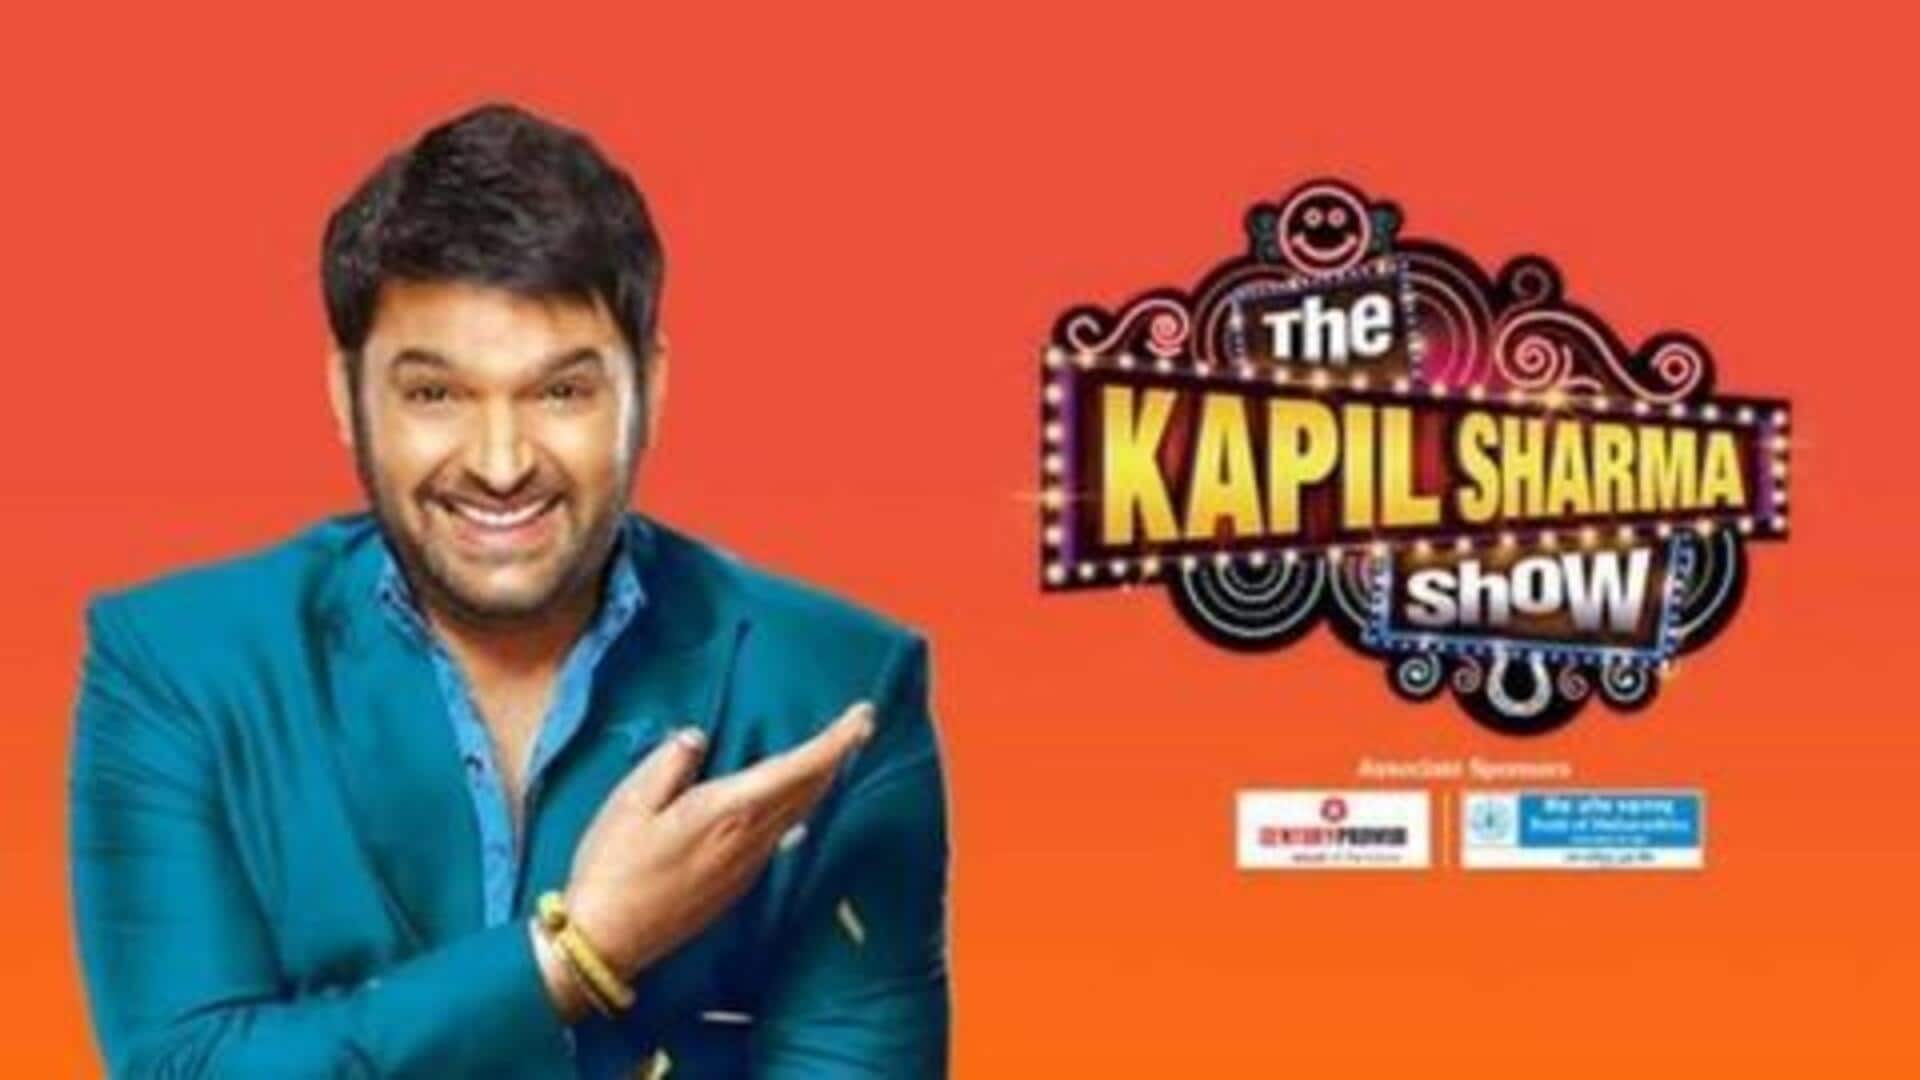 MP High Court clears comedian Kapil Sharma of charges